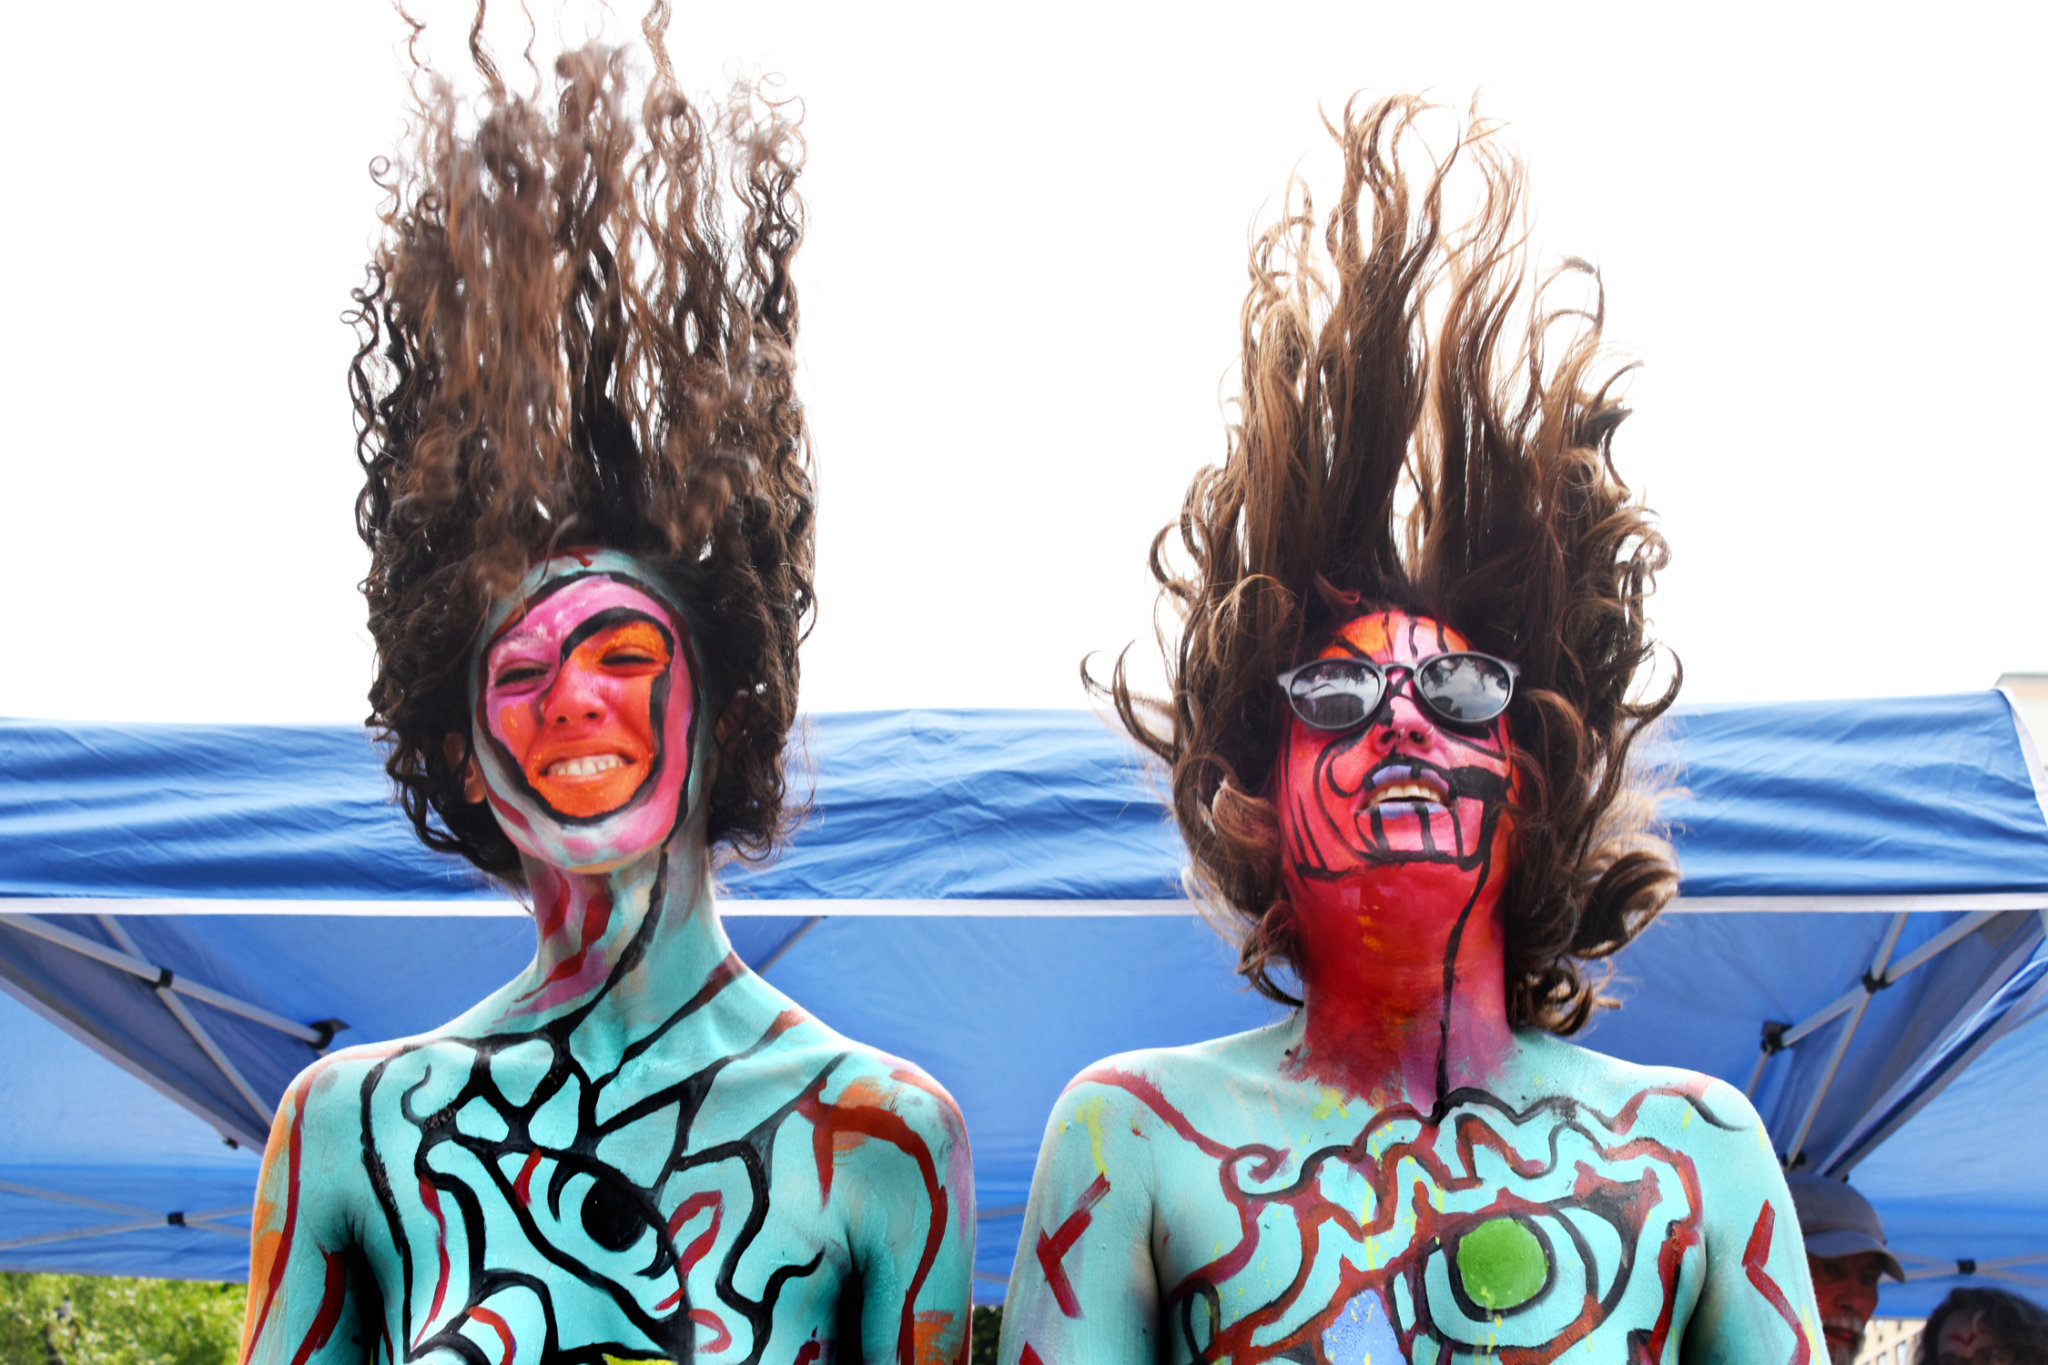 ‘Body Painting Day’ brings daring splashes of color to Union Square